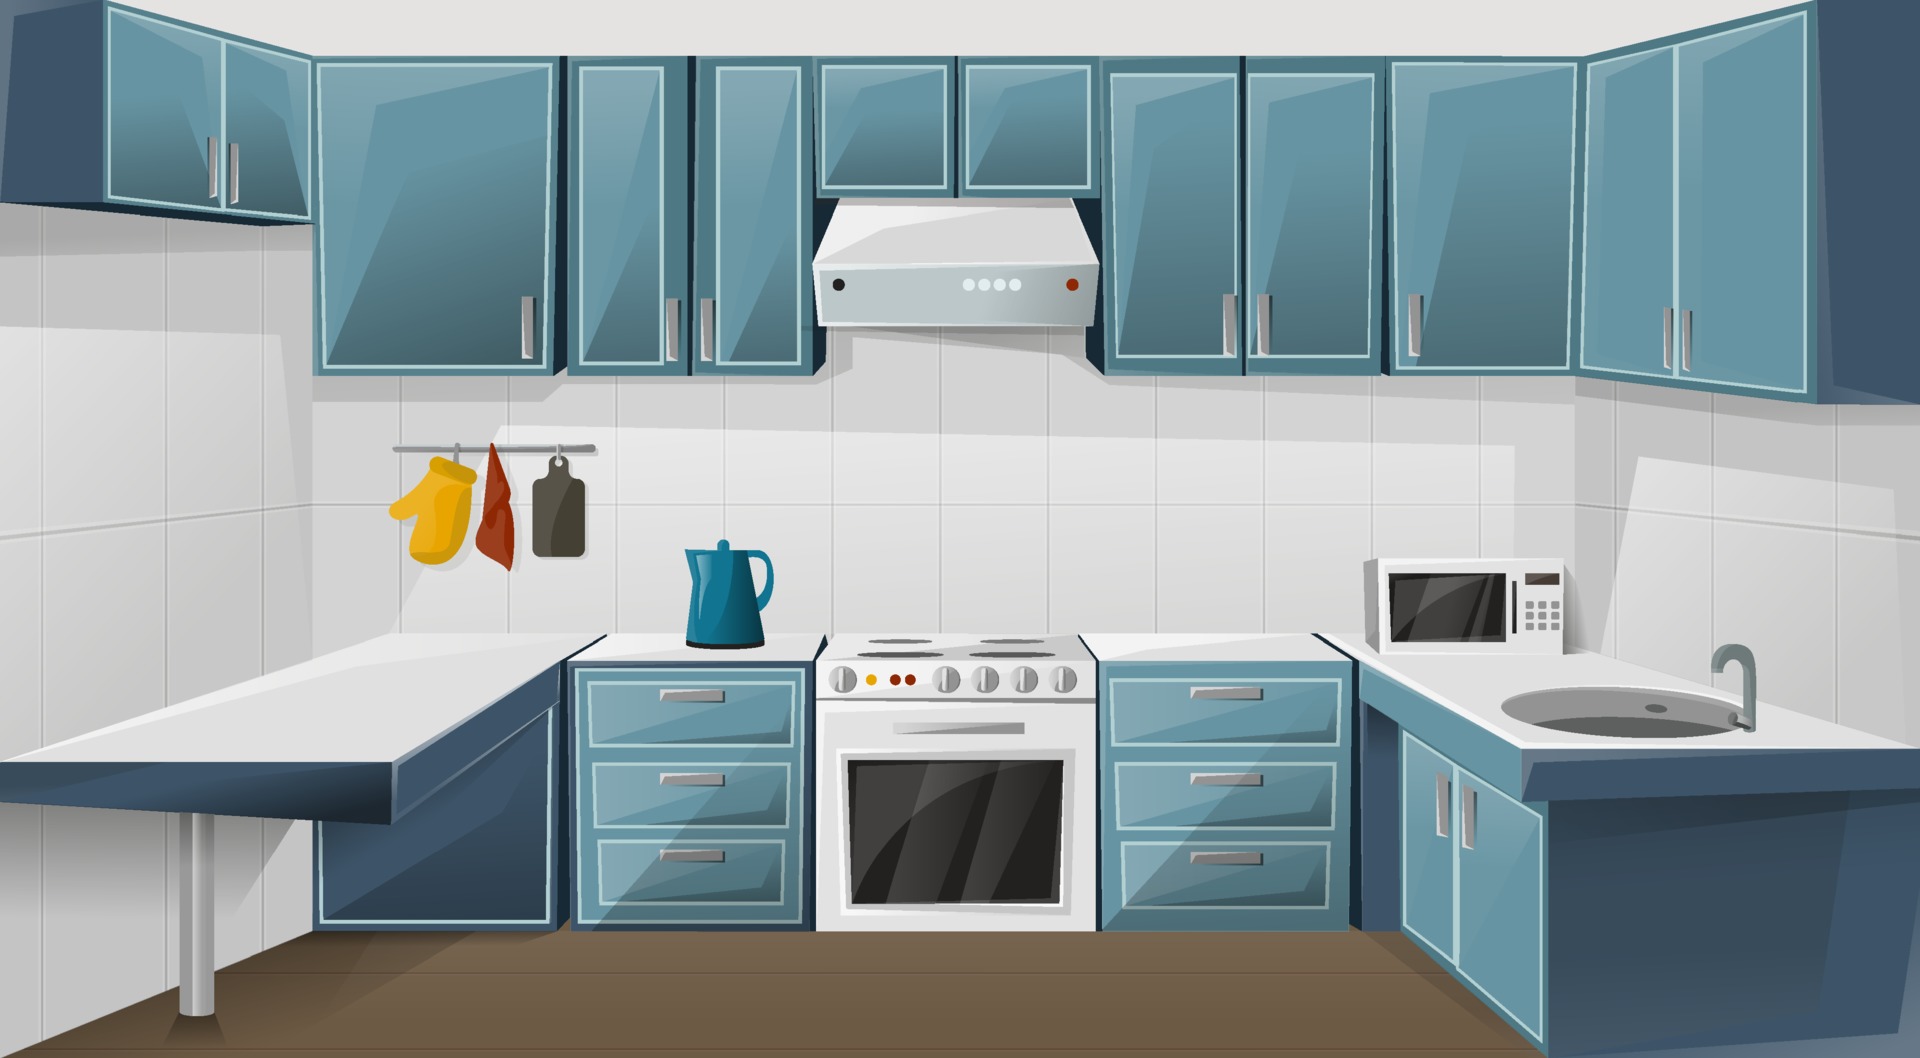 Kitchen Interior Design Room With Fridge Oven Microwave Sink And Kettle Cupboard Furniture Illustration Free Vector 